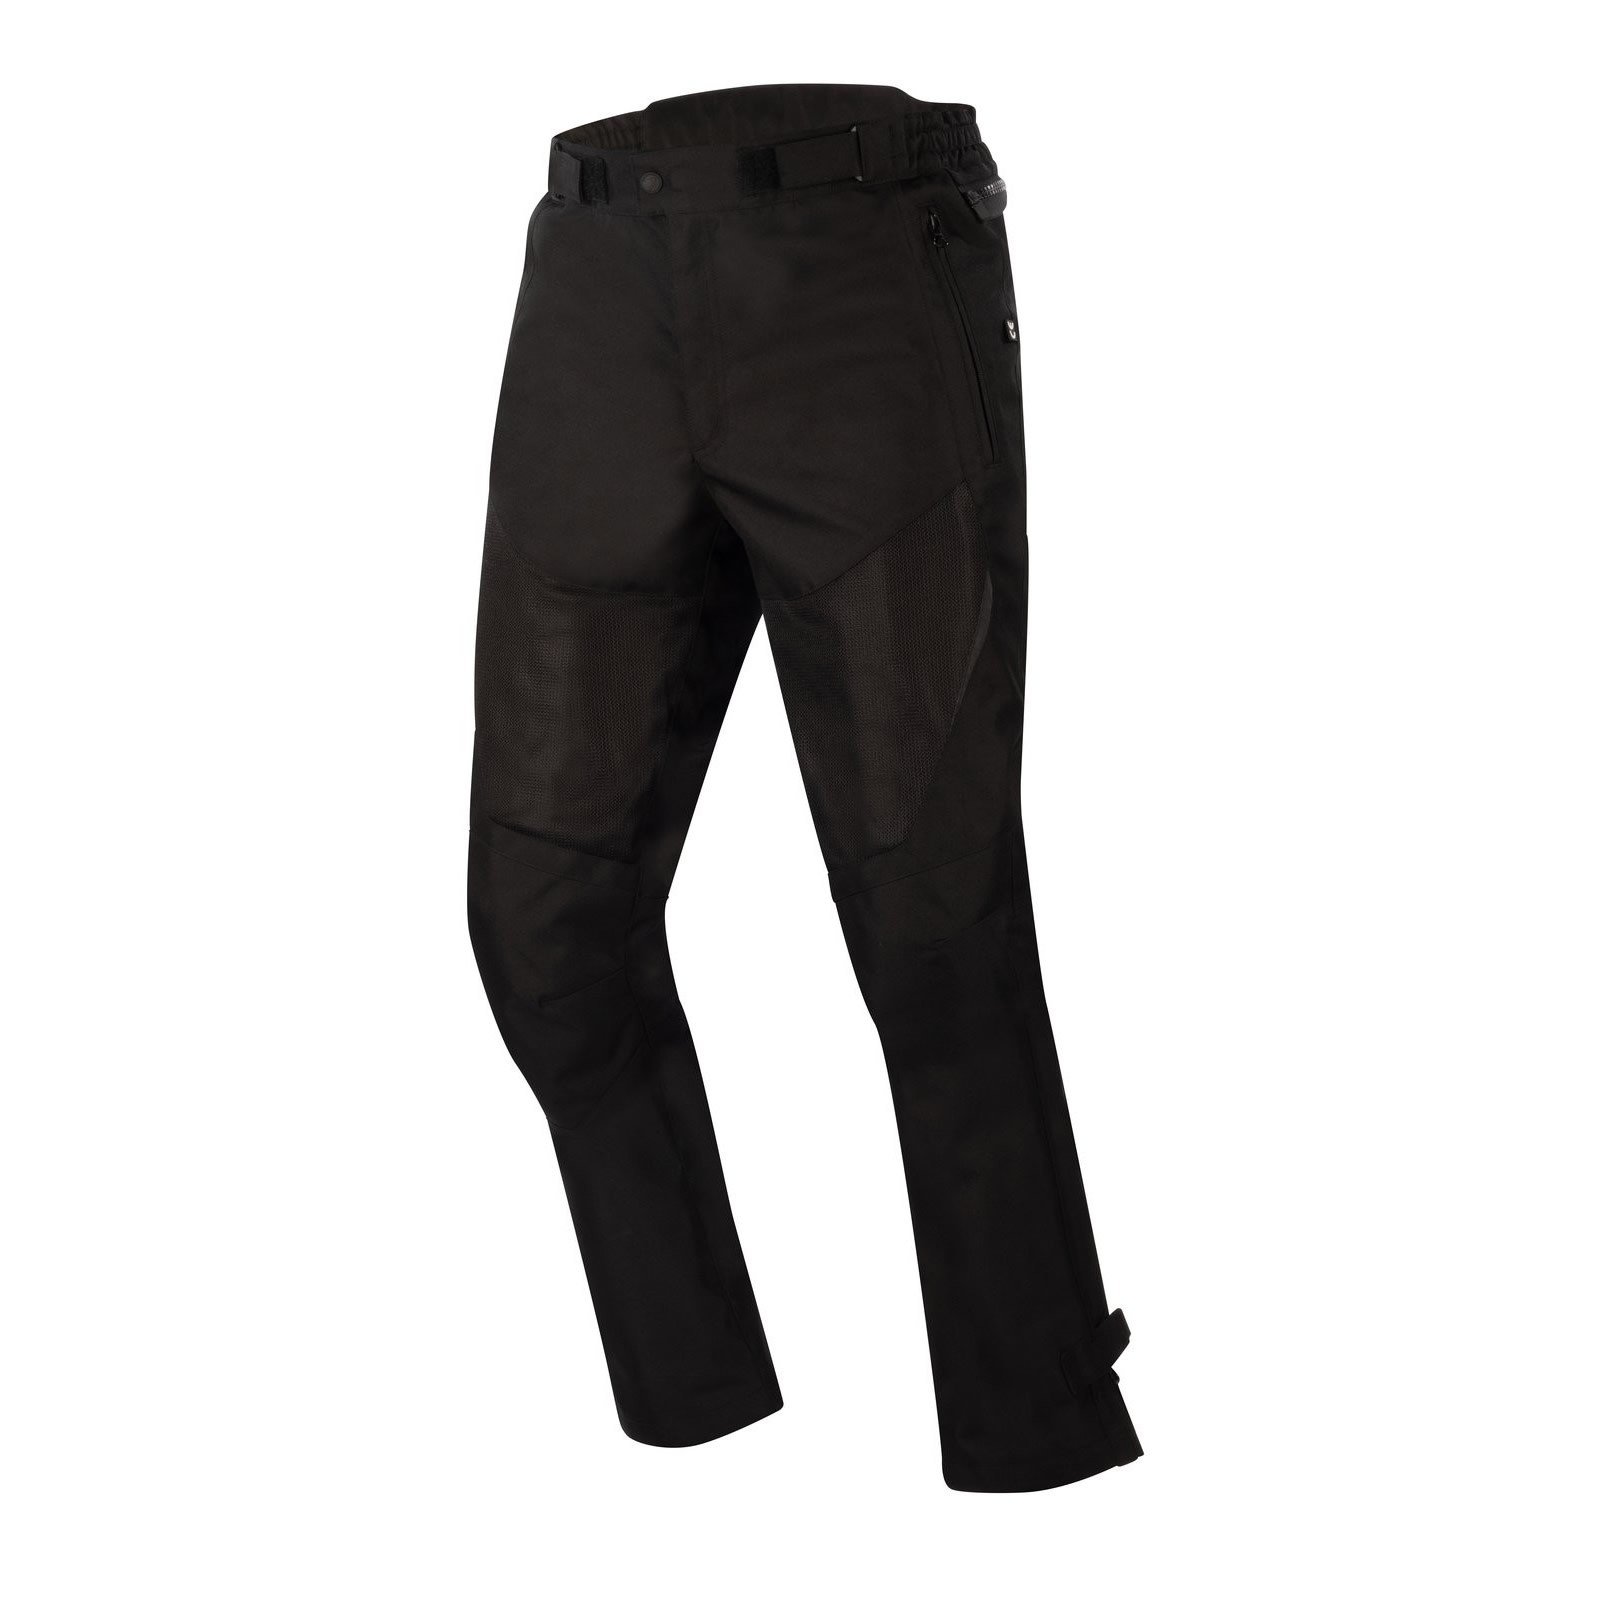 Image of Bering Twister Black Pants Size XL ID 3660815162378